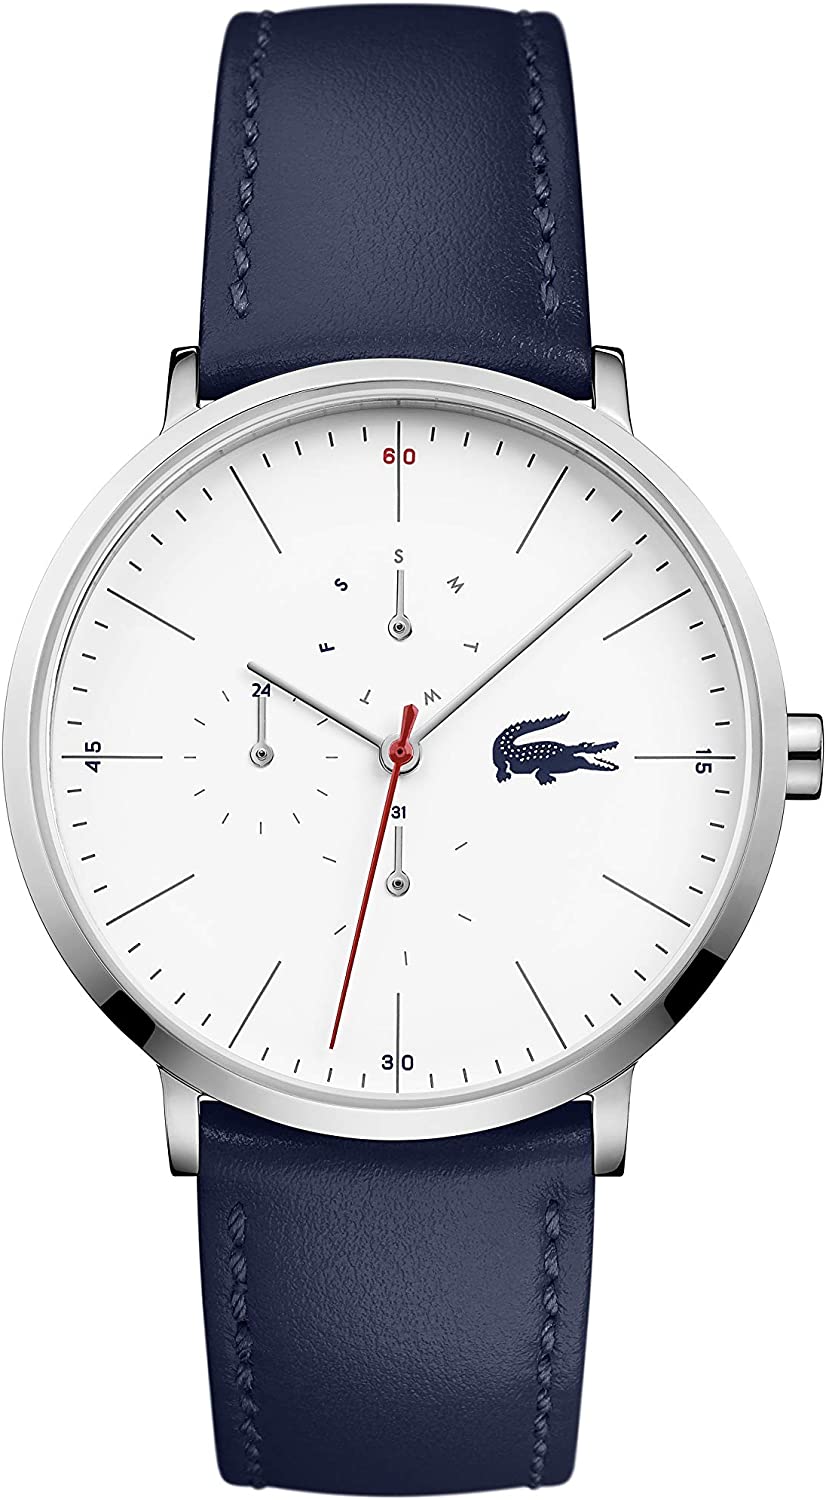 Lacoste Stainless Steel Quartz Watch with Leather Strap, Blue, 19.5 (Model: 2010975)